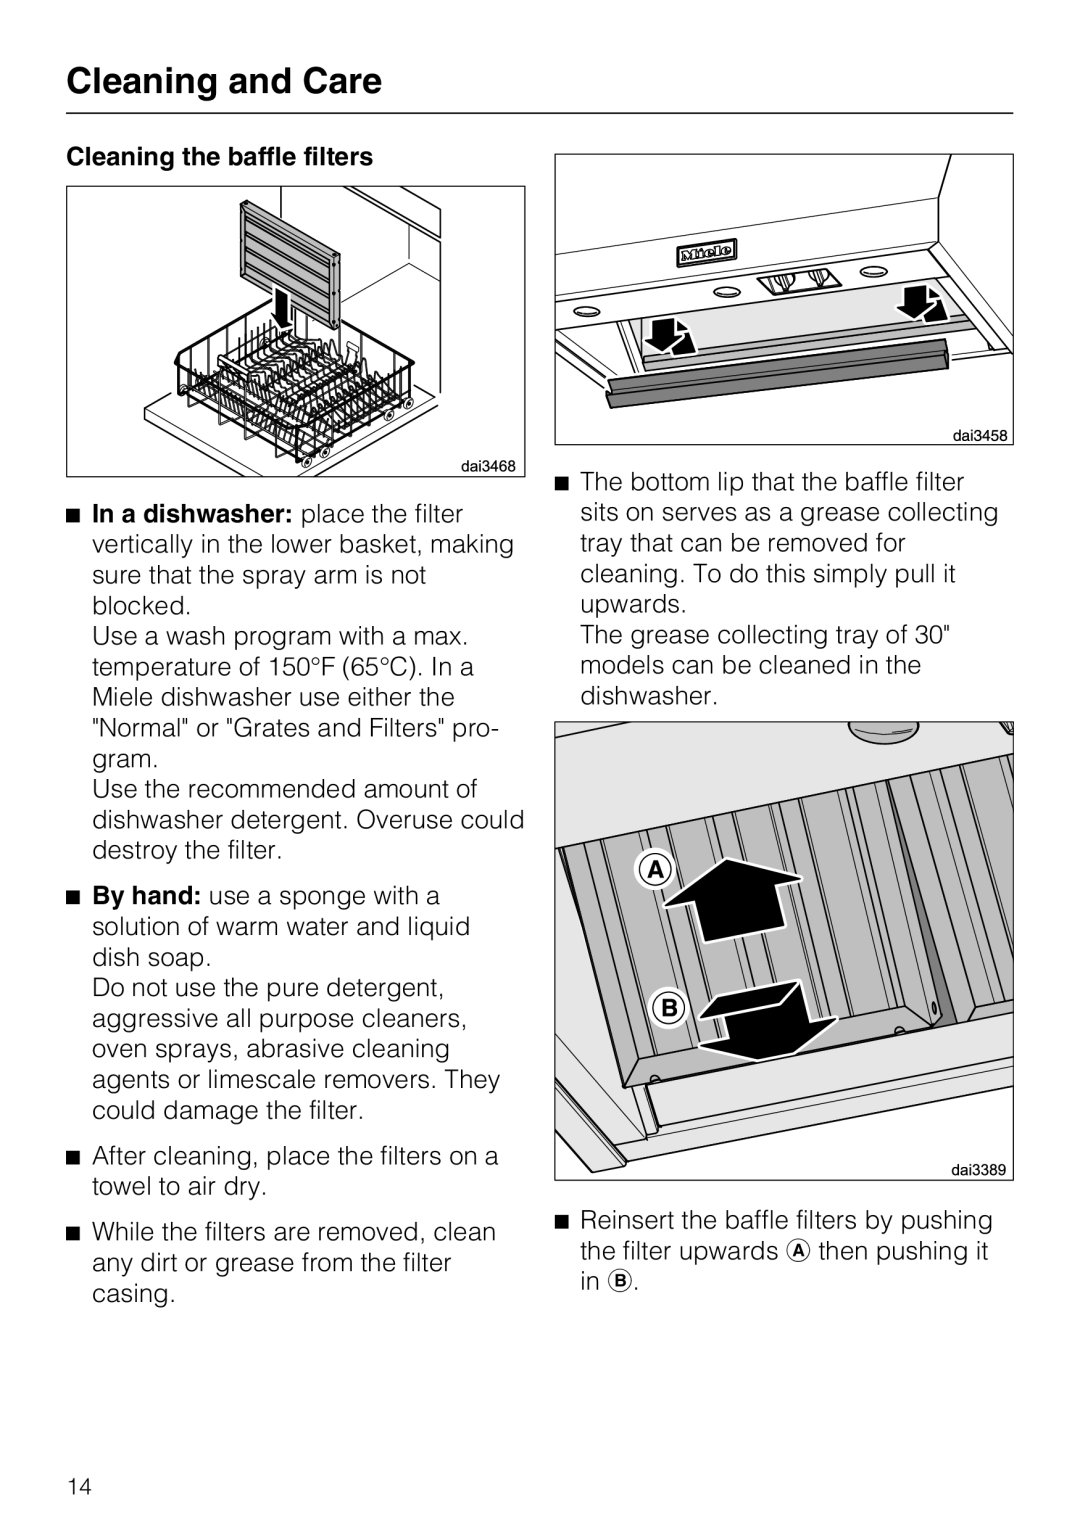 Miele 09 824 260 installation instructions Cleaning and Care, Cleaning the baffle filters 